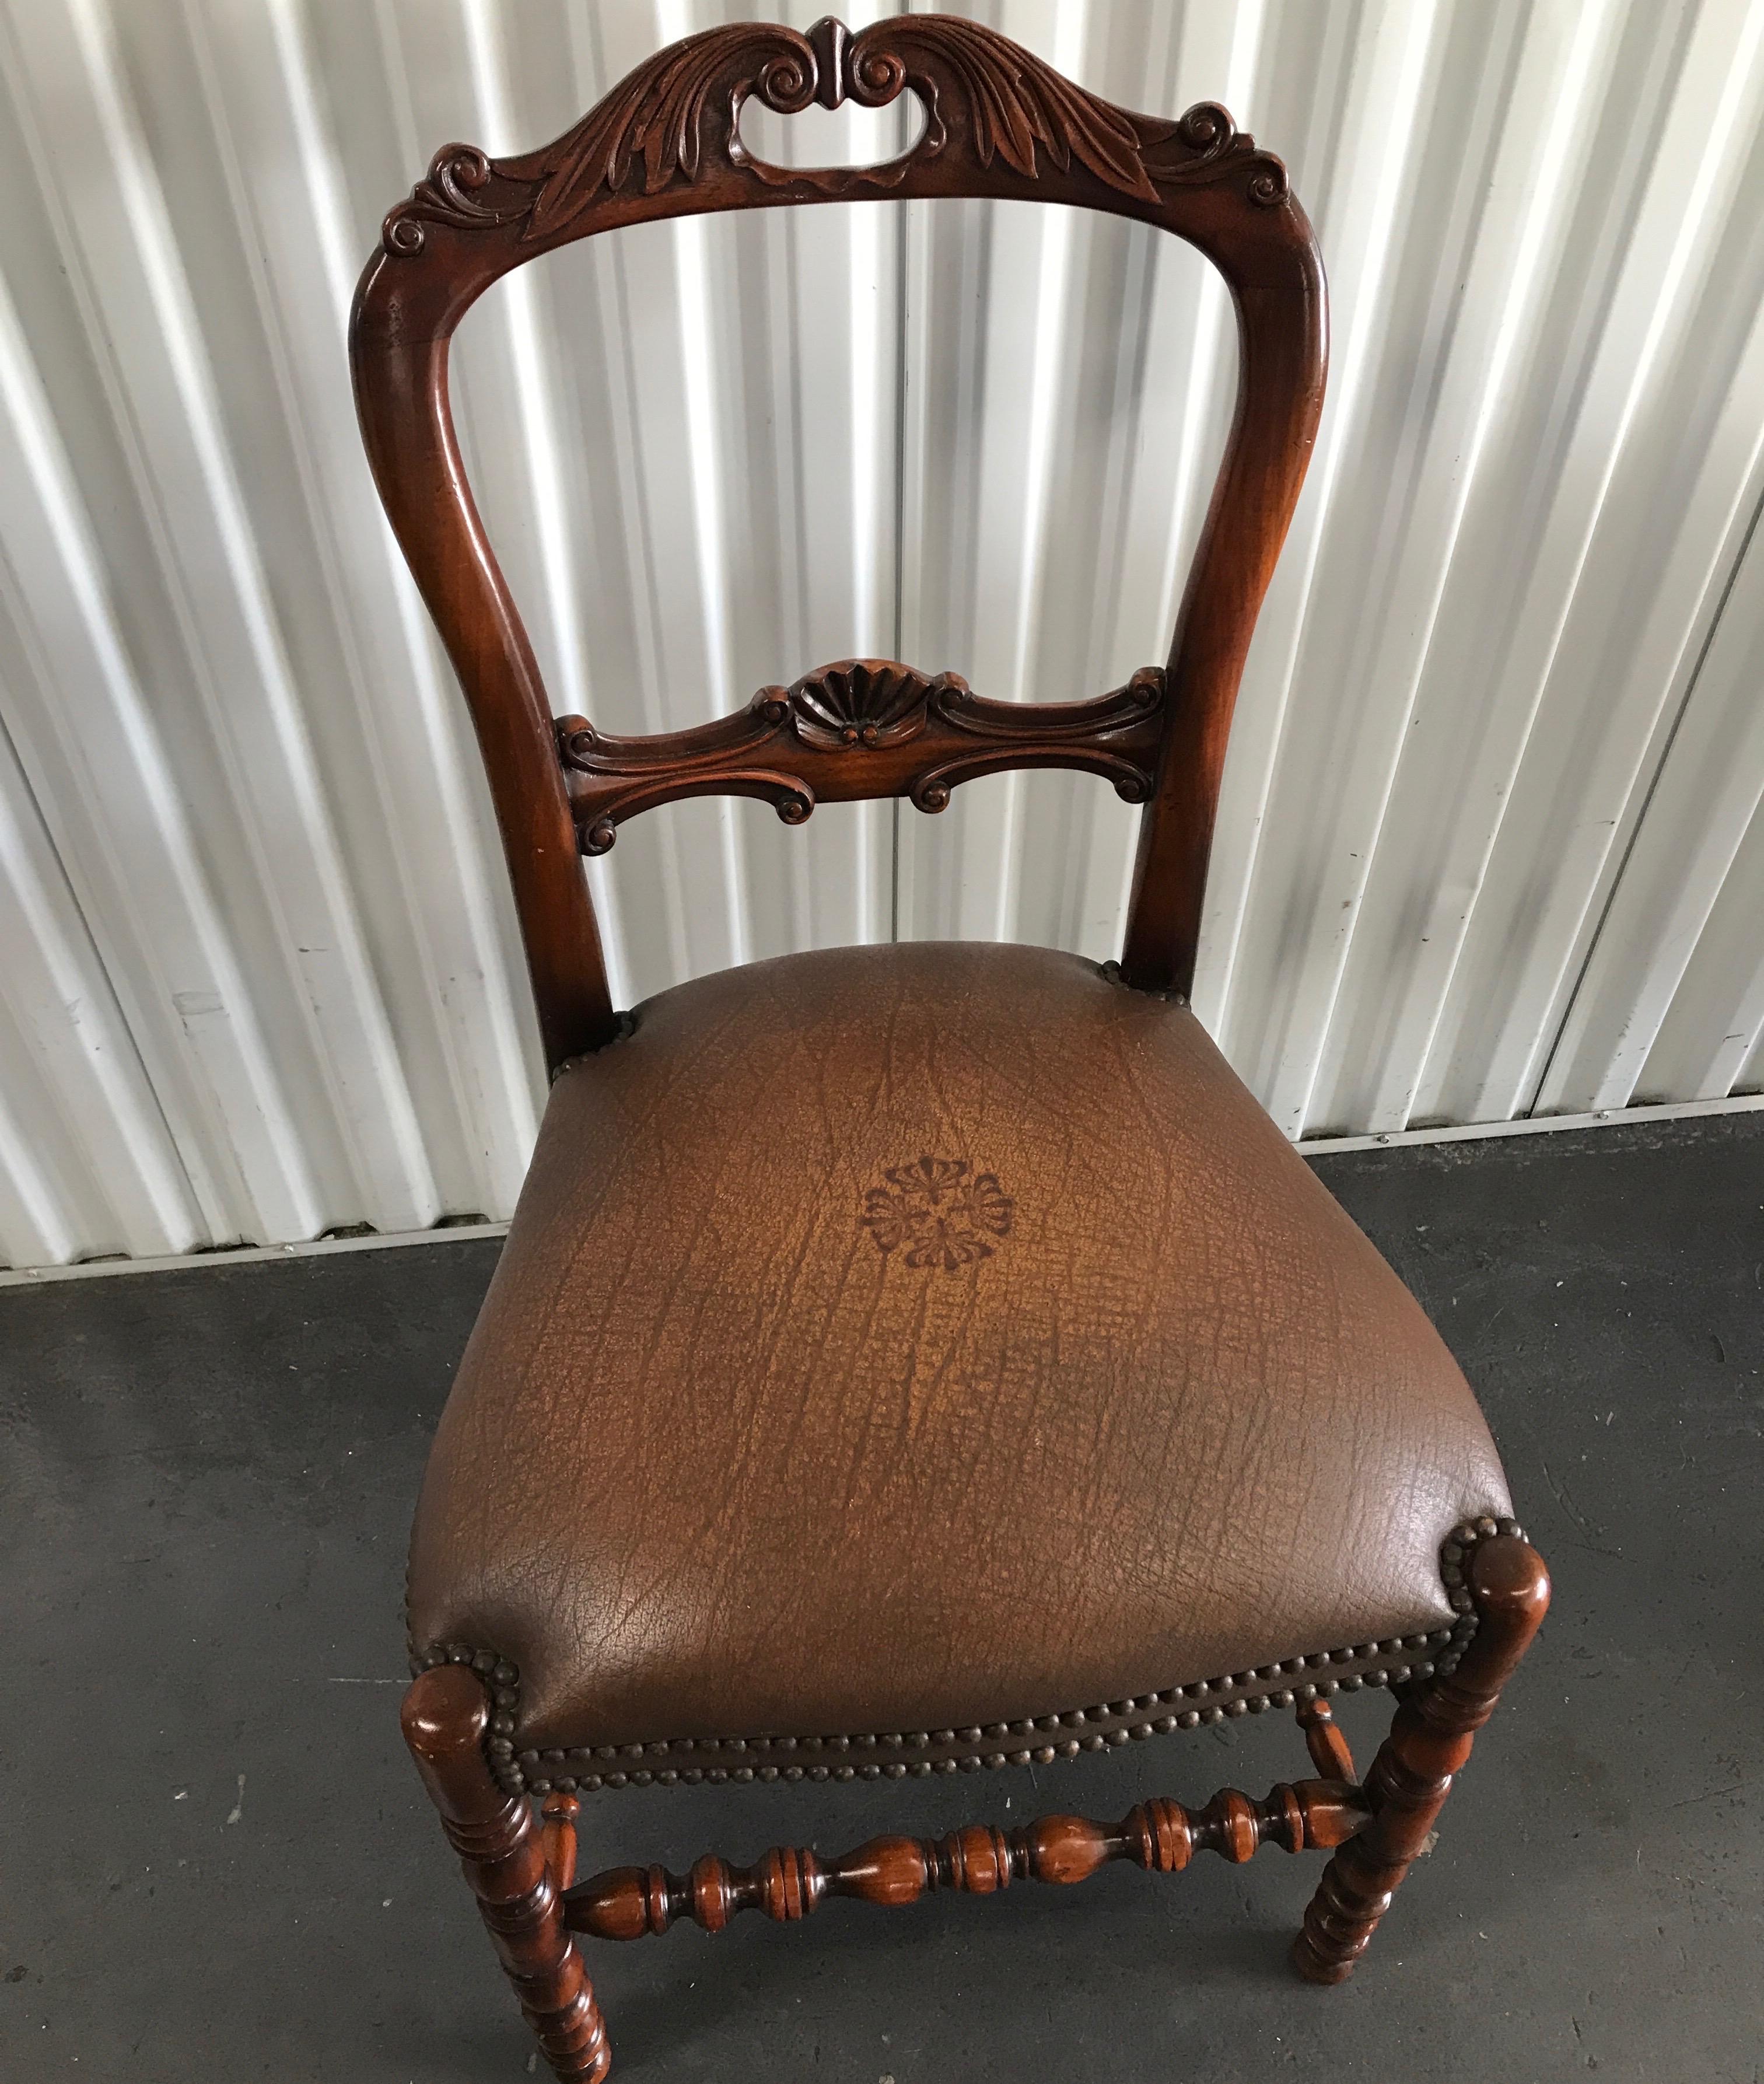 Carved wood desk chair with embossed leather studded seat by Theodore Alexander.